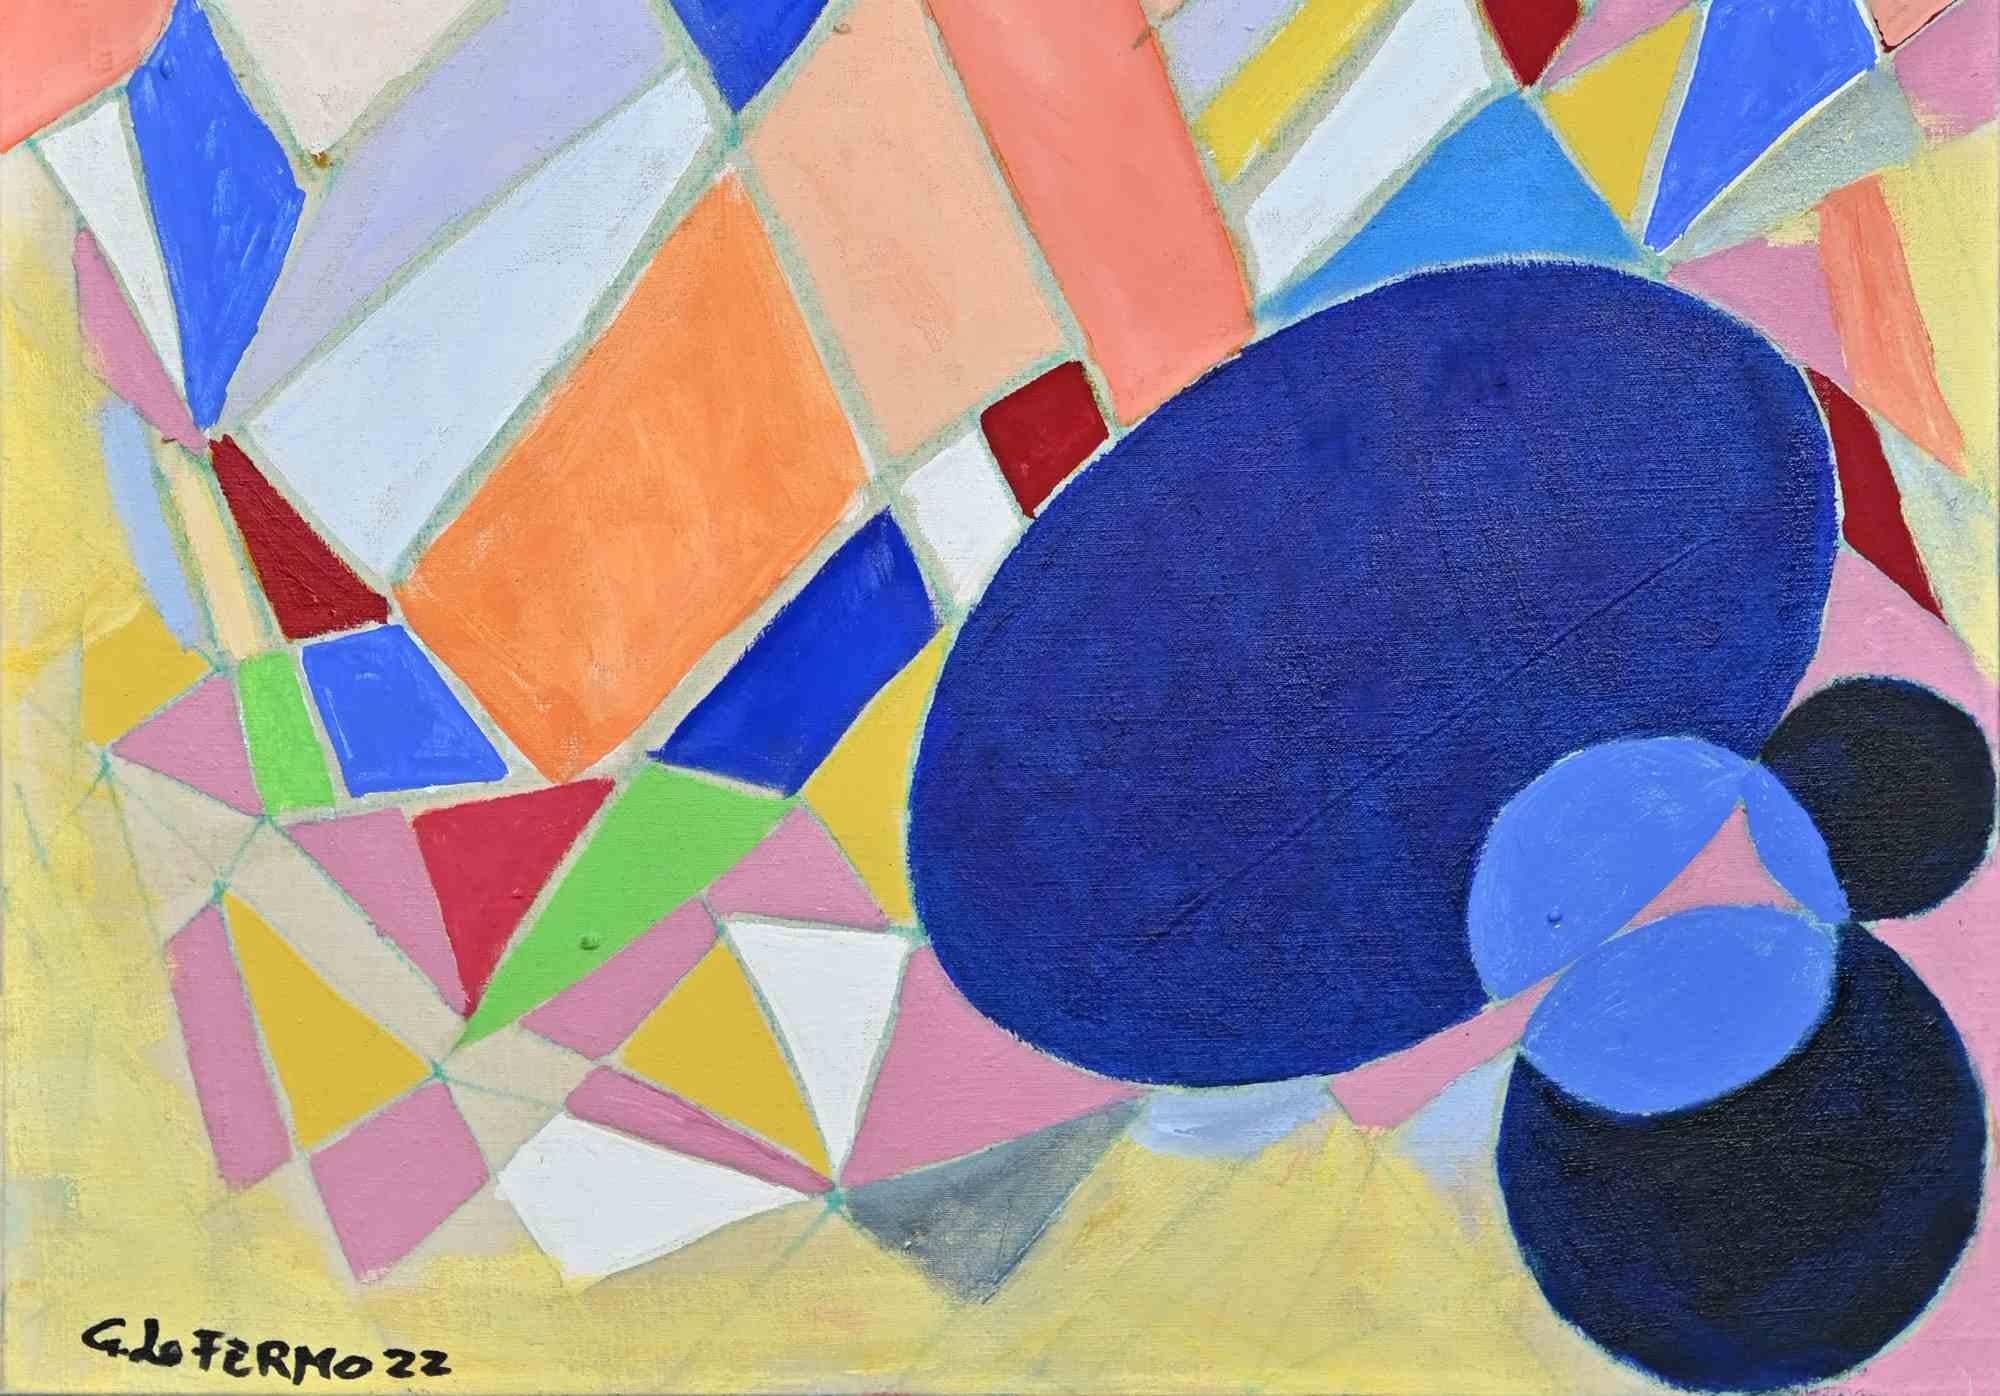 Colored facets is an original artwork realized by Giorgio Lo Fermo (b. 1947) in 2022.

Original Oil Painting on Canvas.

Hand signed and dated on the lower left margin and on the back of the canvas.

Good conditions.

Giorgio Lo Fermo is an Italian